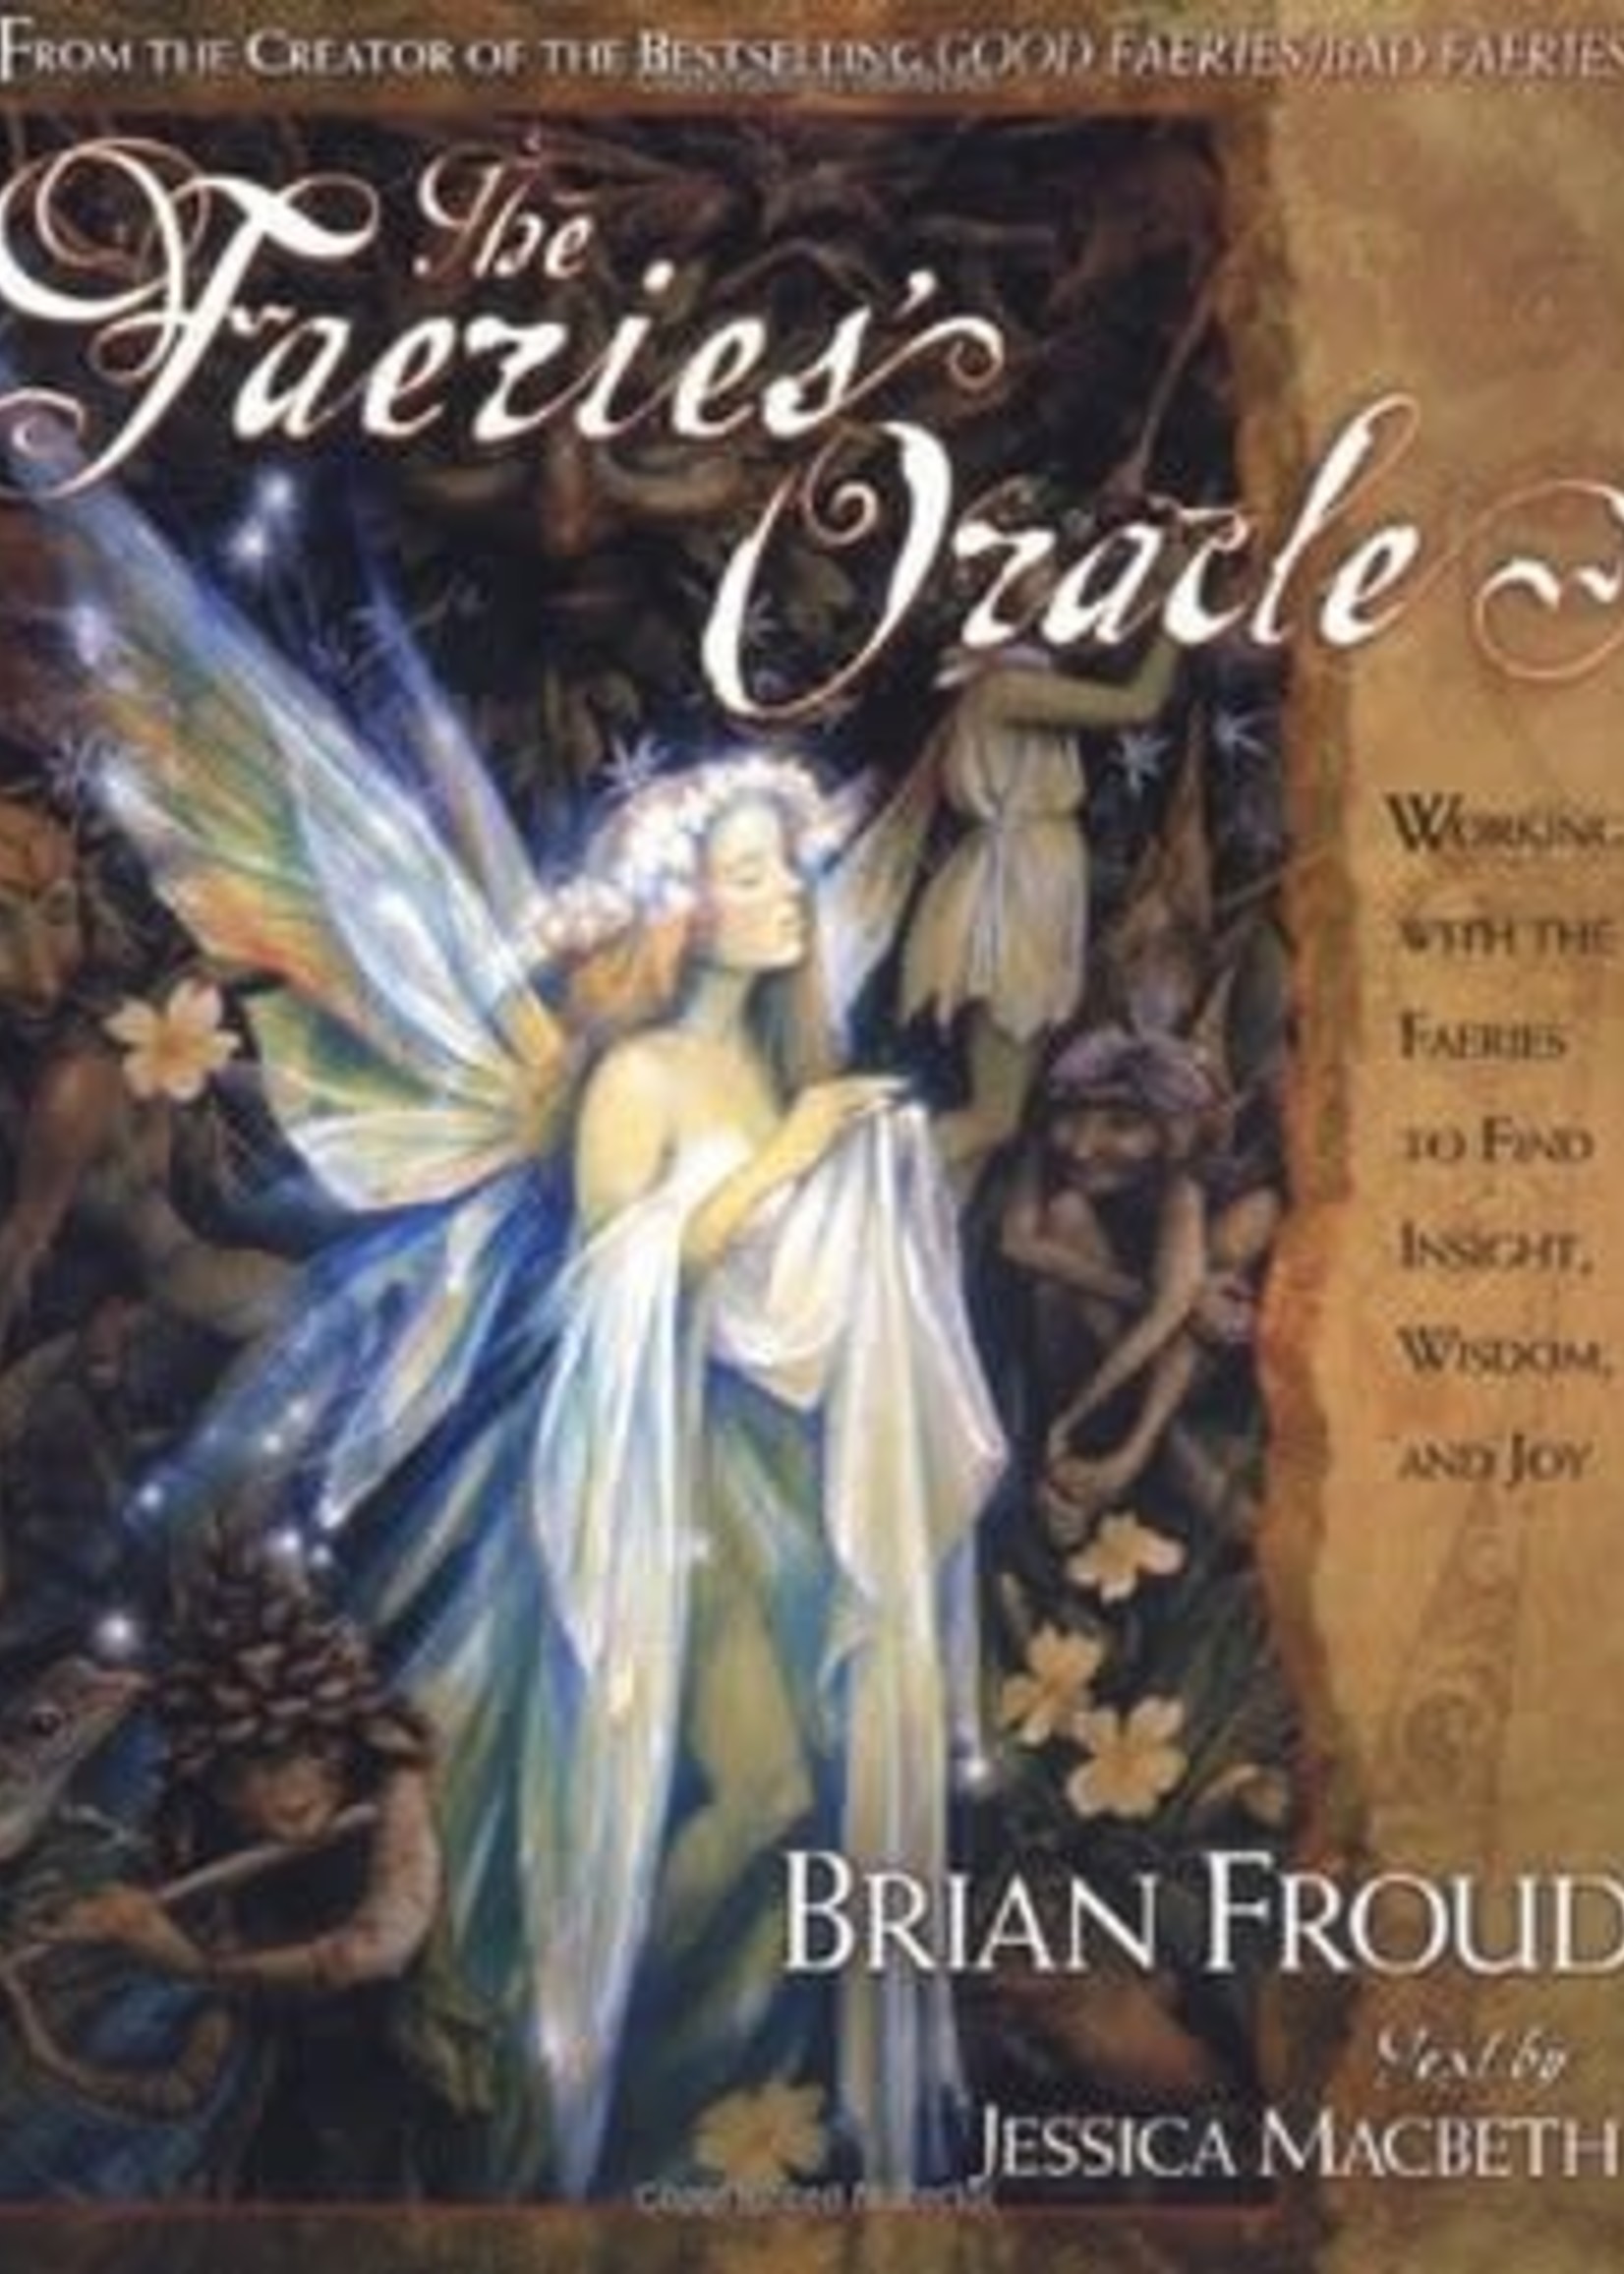 The Faeries' Oracle by Brian Froud, Jessica Macbeth